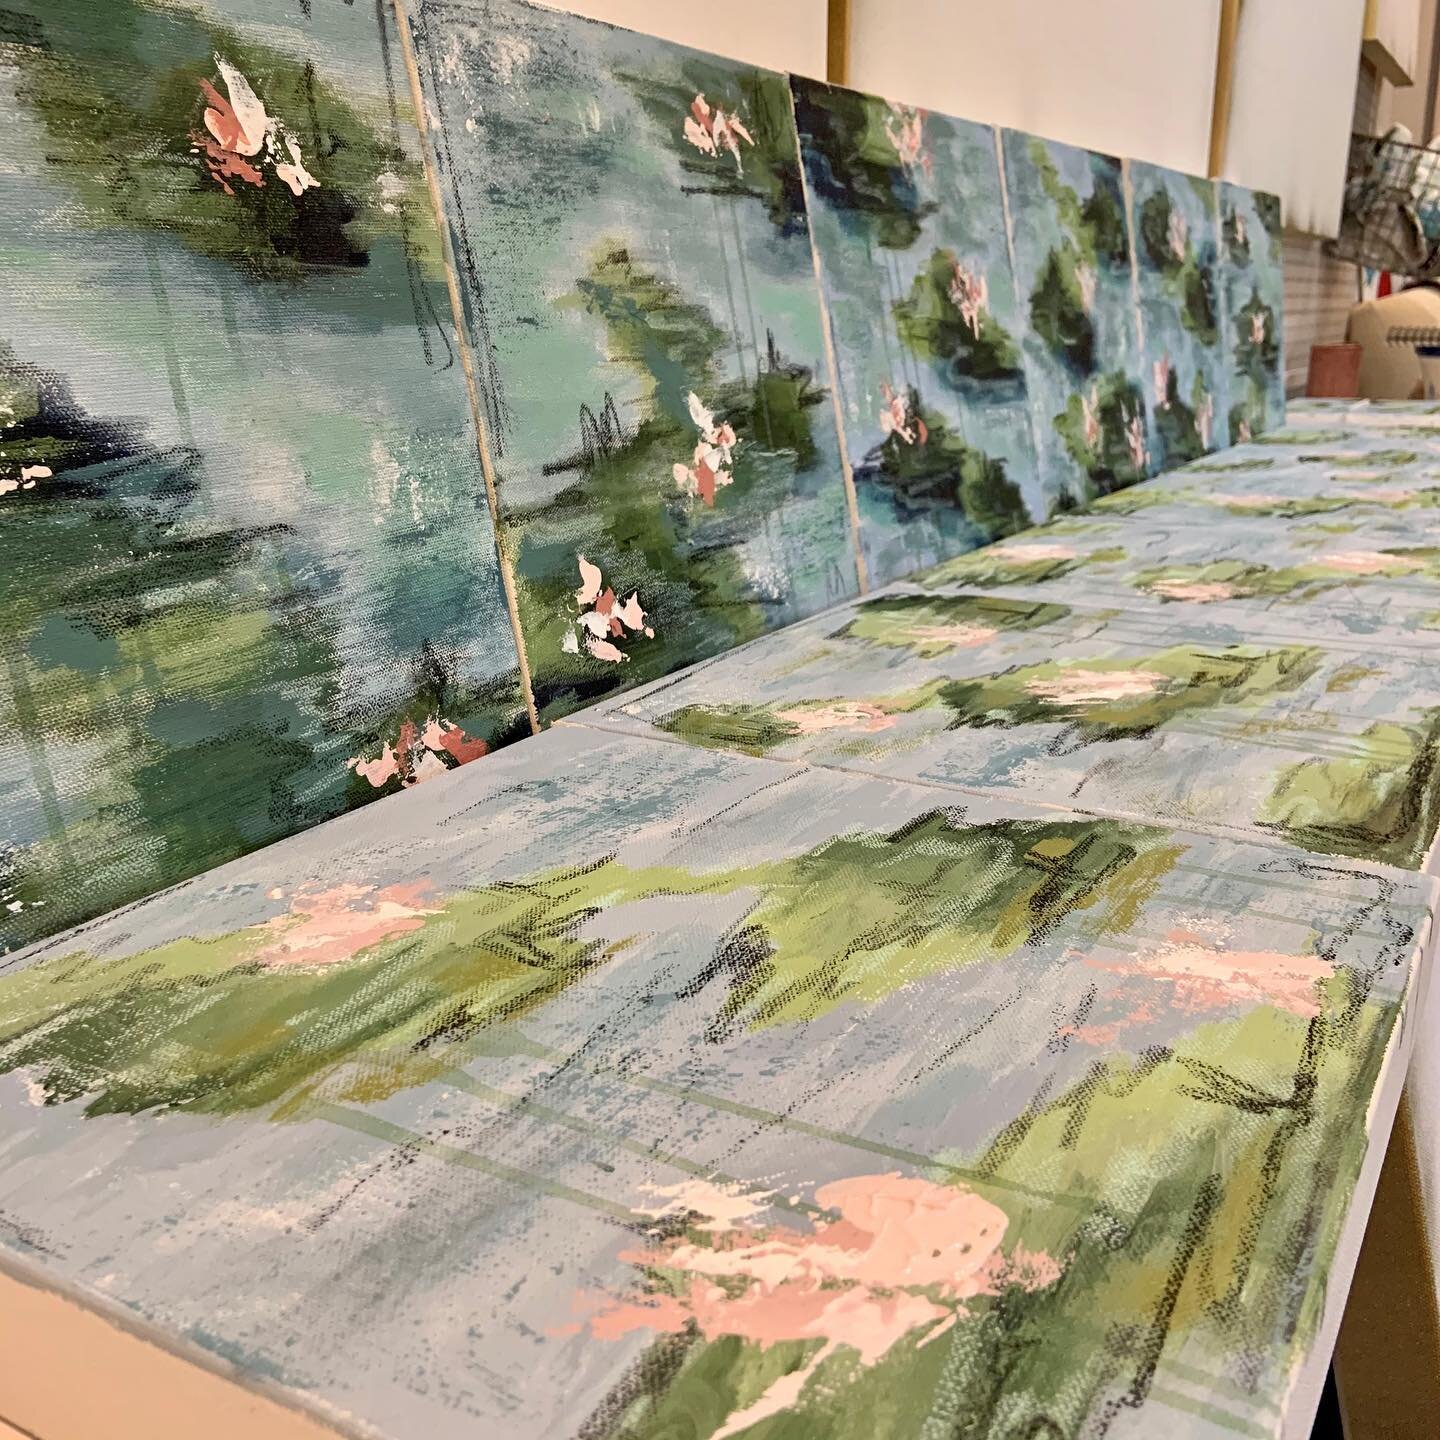 Pretty Maids all in a Row

I have exciting news. Mark your calendars for September 10th for the reveal of my new website and release of my Water Lily series.  This launch will have primarily larger works on canvas but I&rsquo;m also including some of